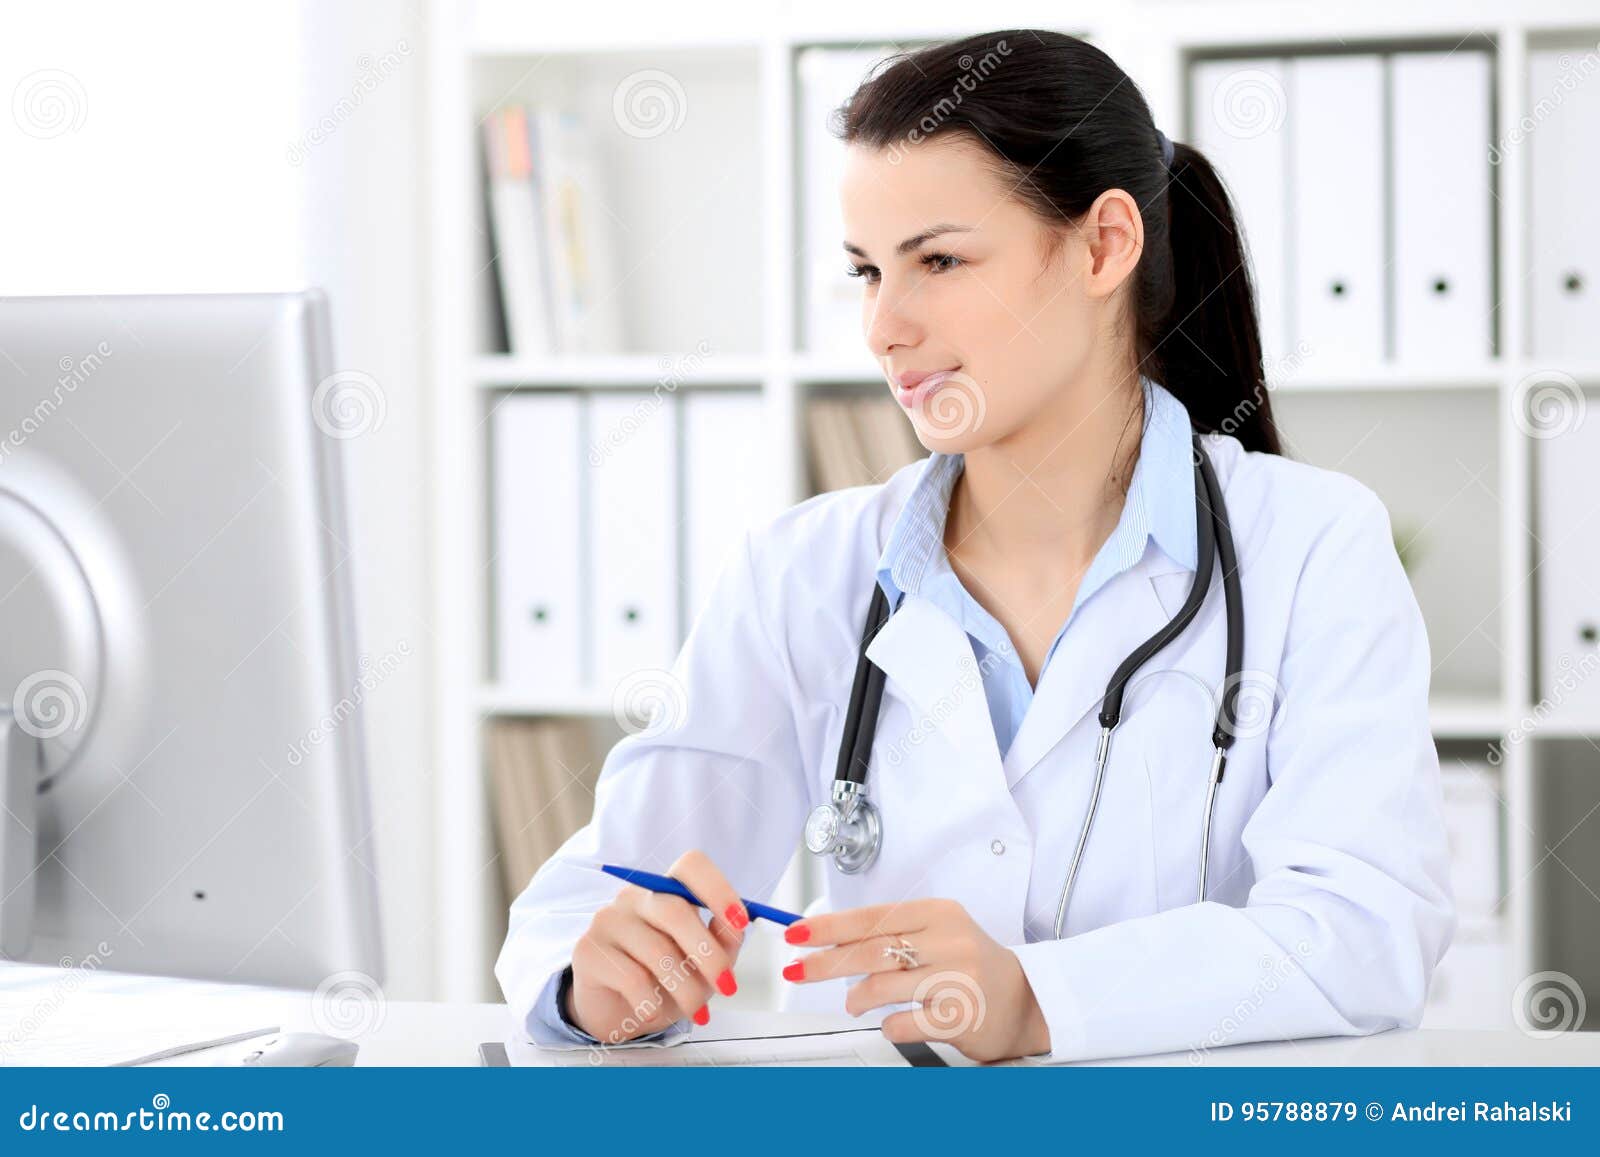 Young Brunette Female Doctor Sitting At The Table And Working By